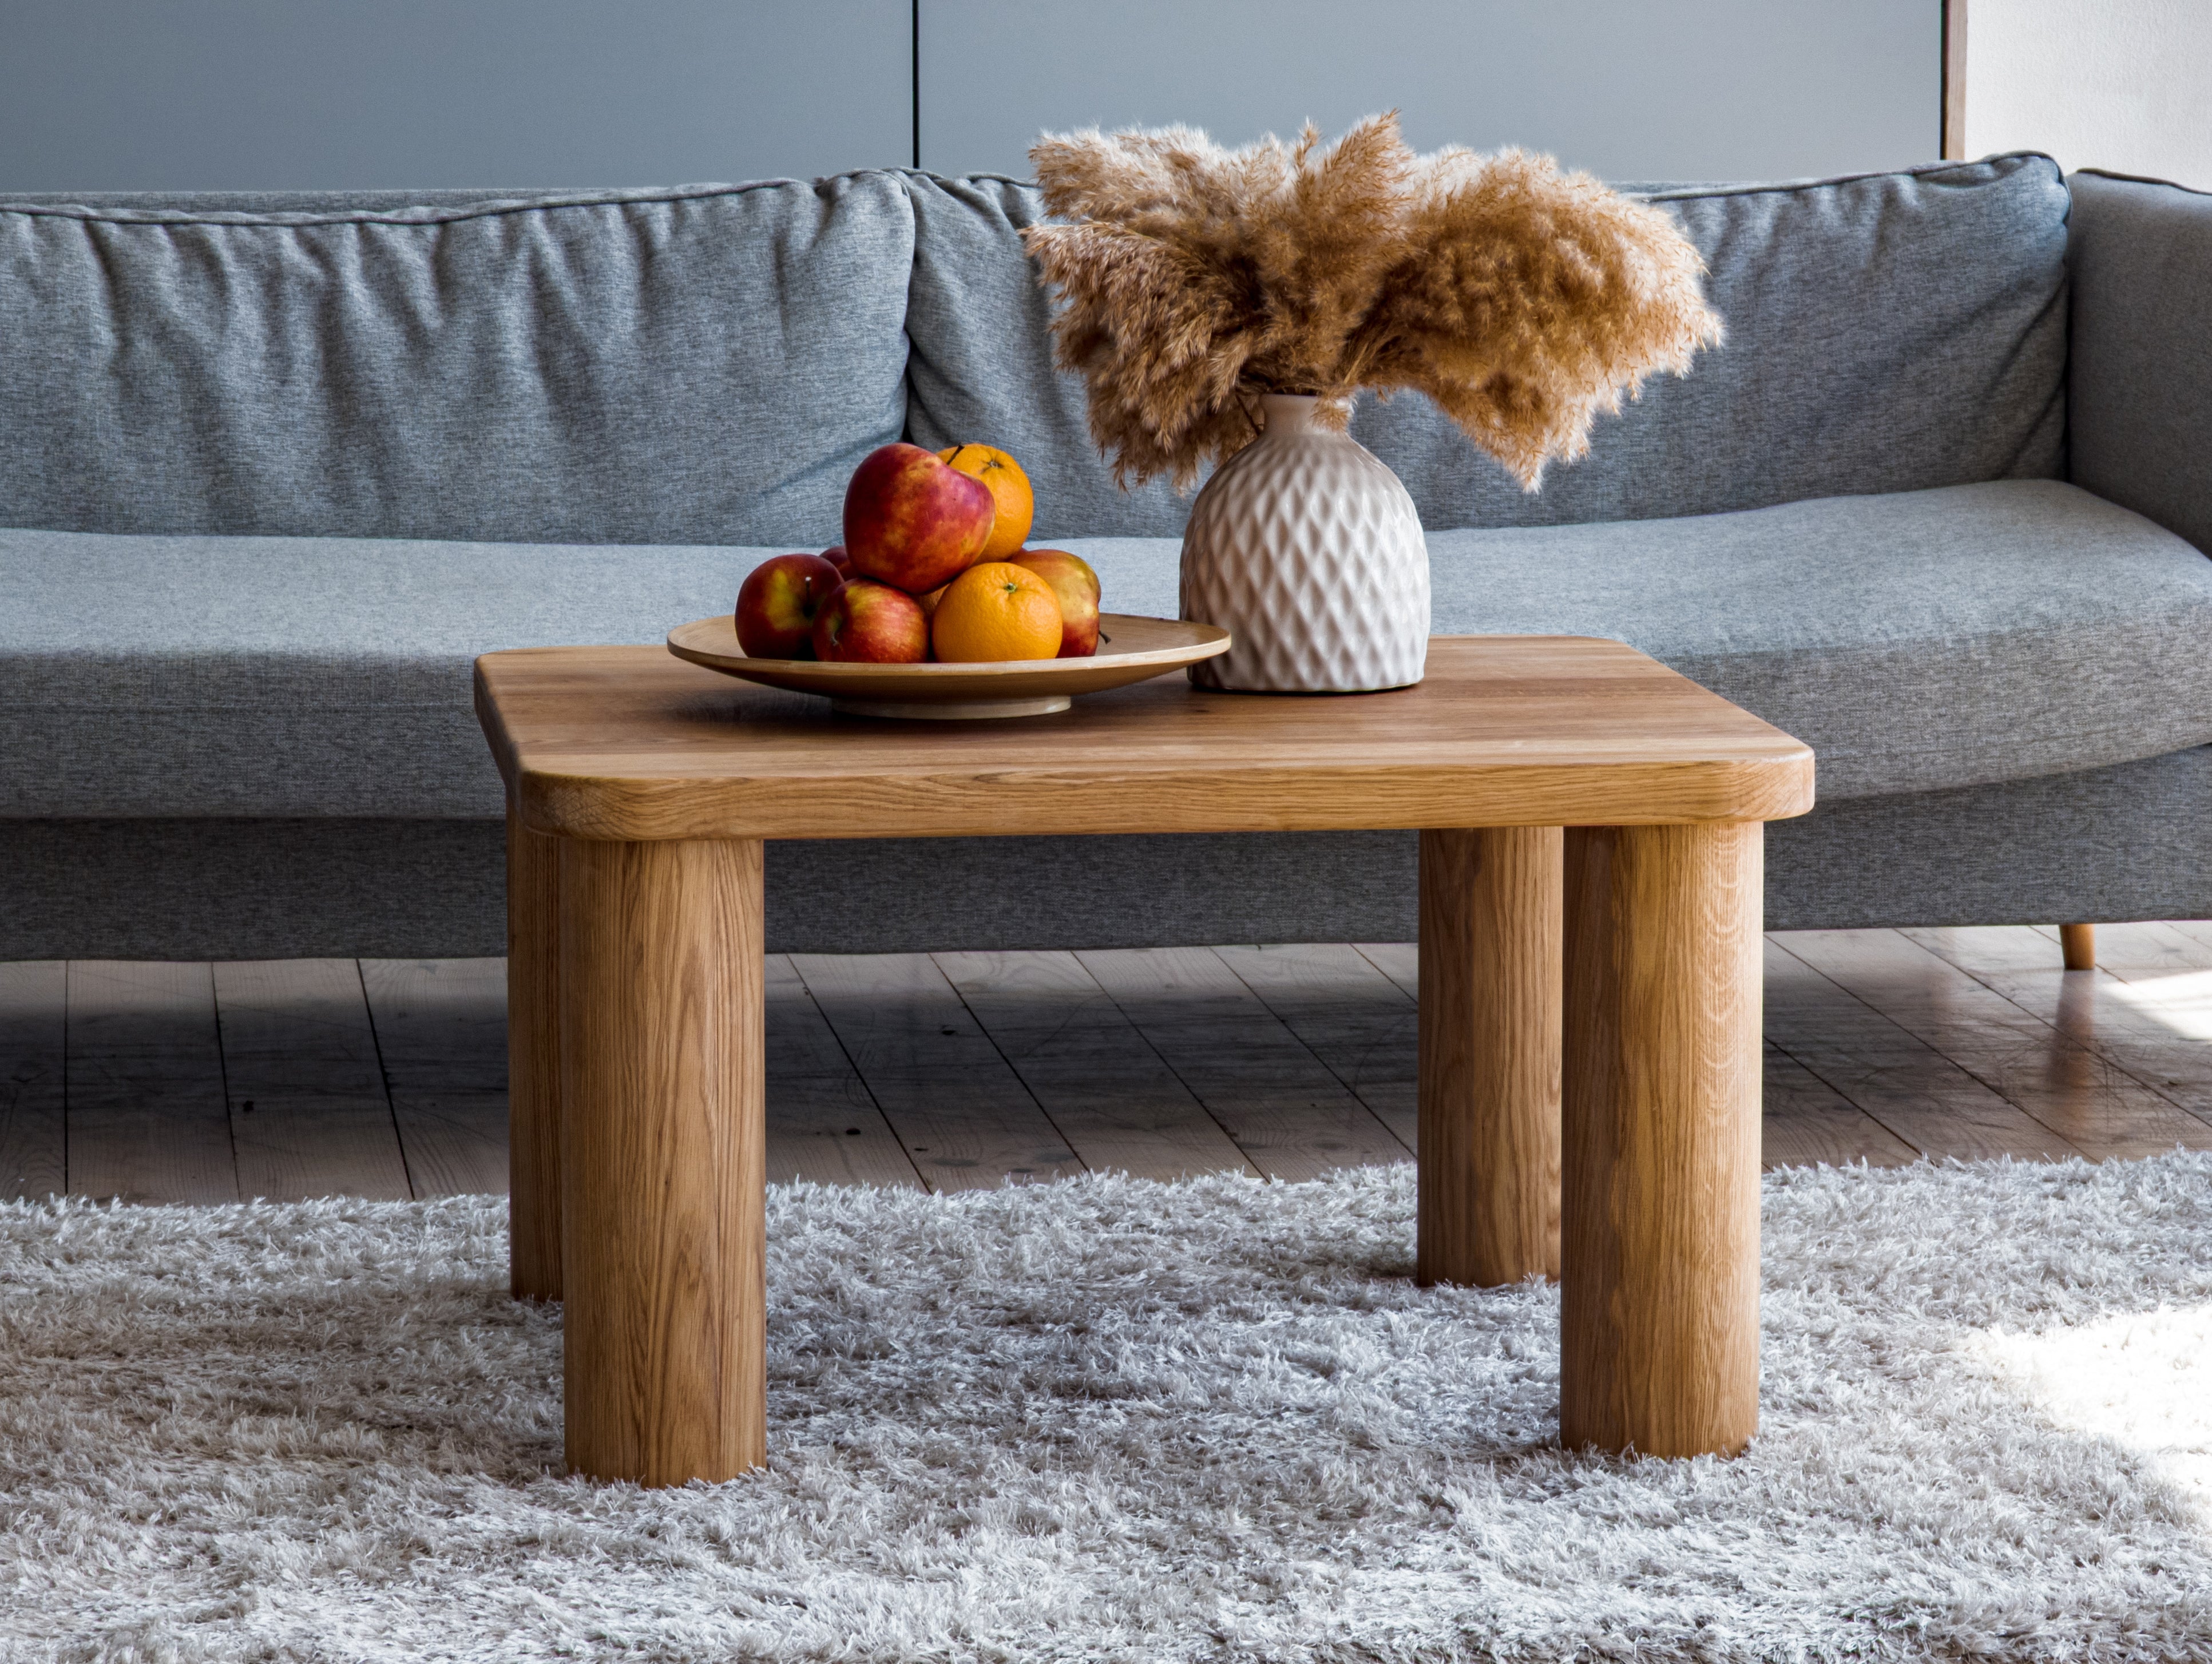 Coffee table: An elegant accent for a stylish and cozy interior